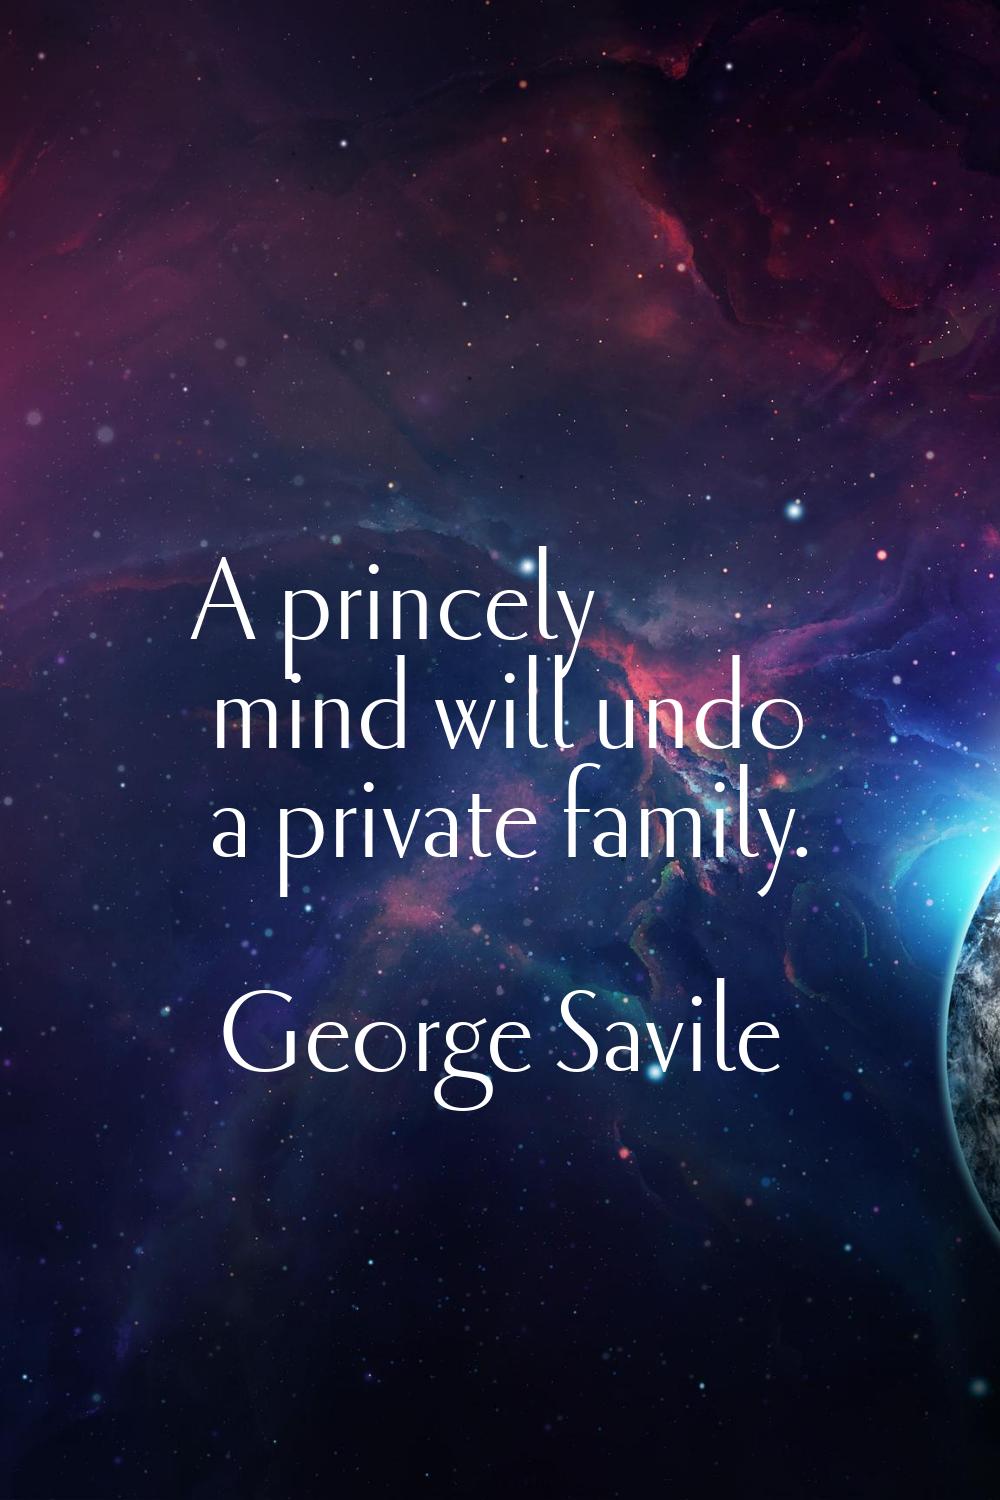 A princely mind will undo a private family.